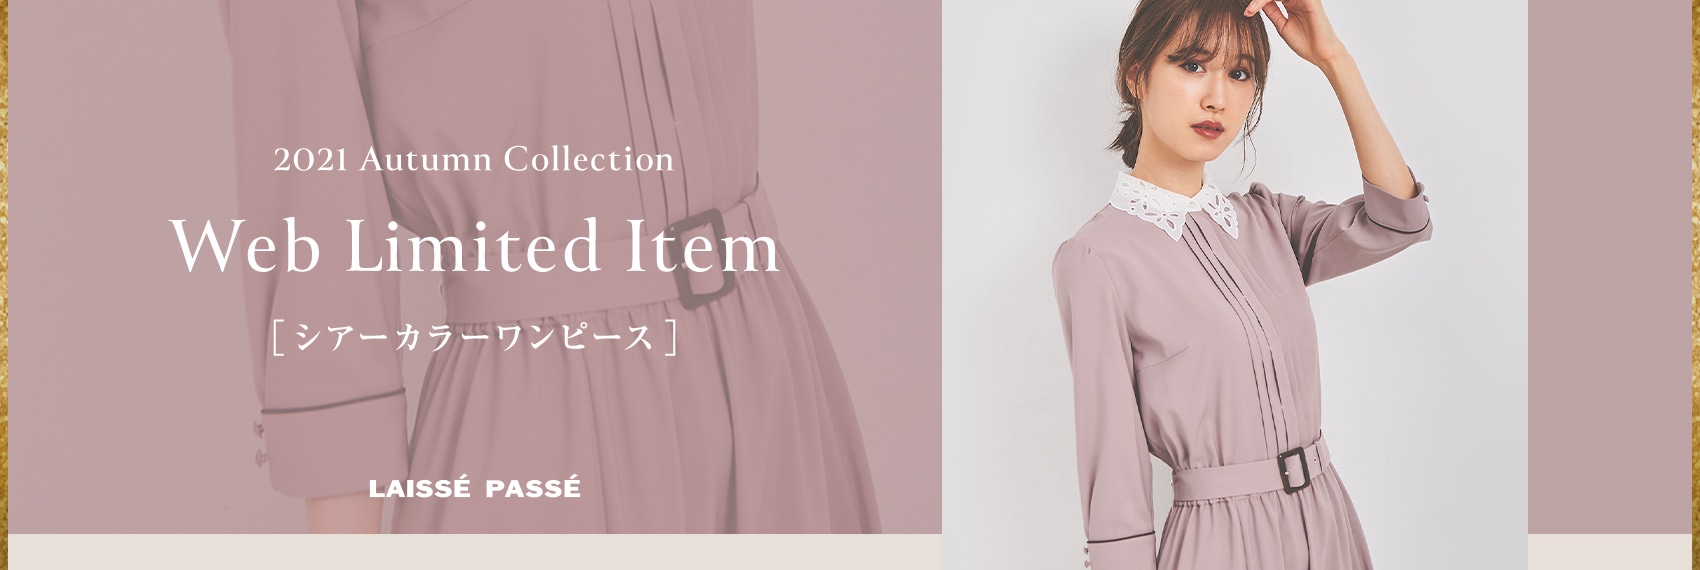 2021 Autumn Collection Web Limited Item シアーカラーワンピース